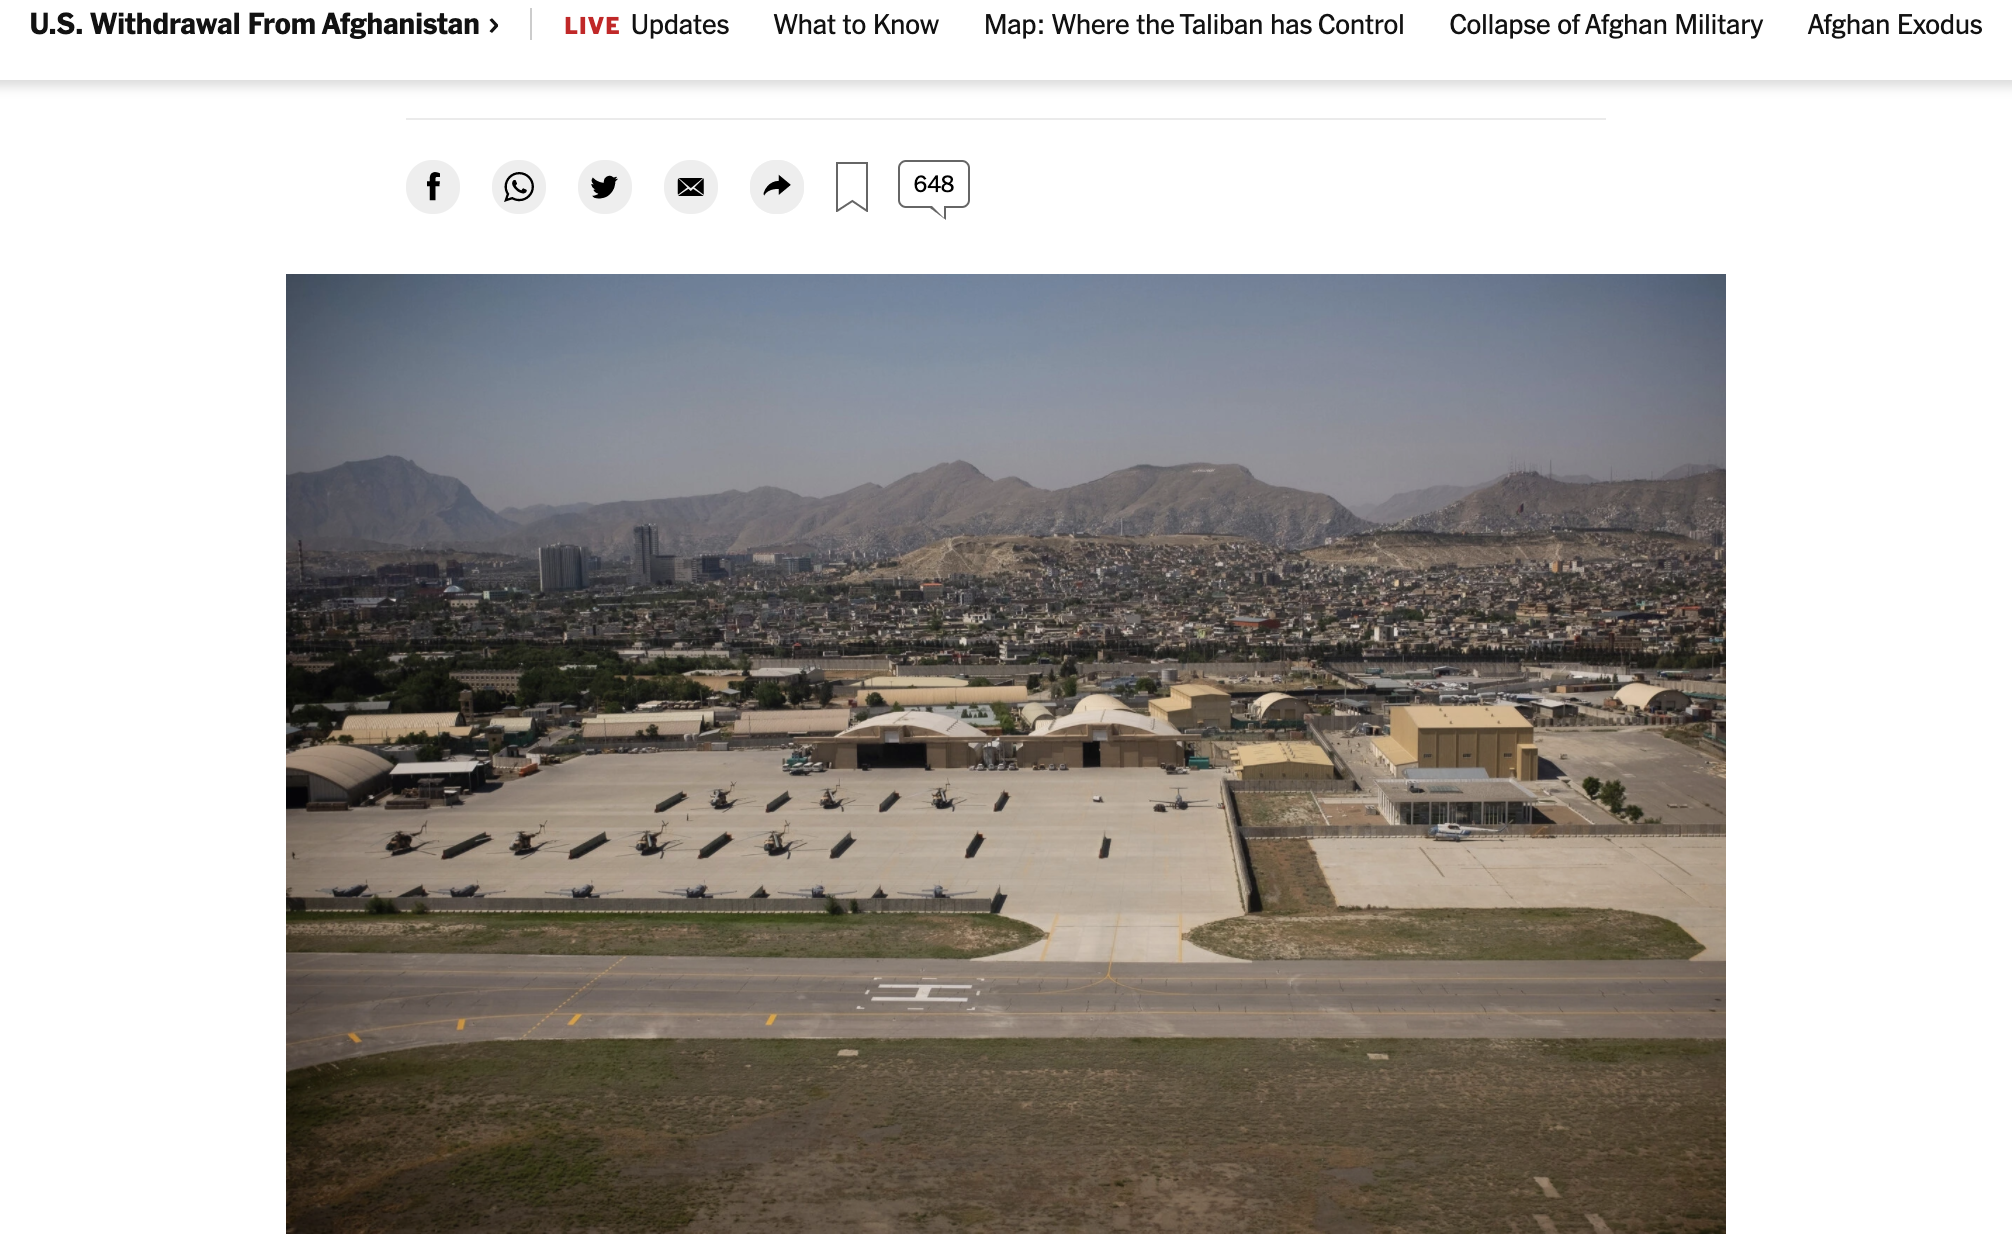 Thumbnail of The military side of Hamid Karza_na Hayeri for The New York Times